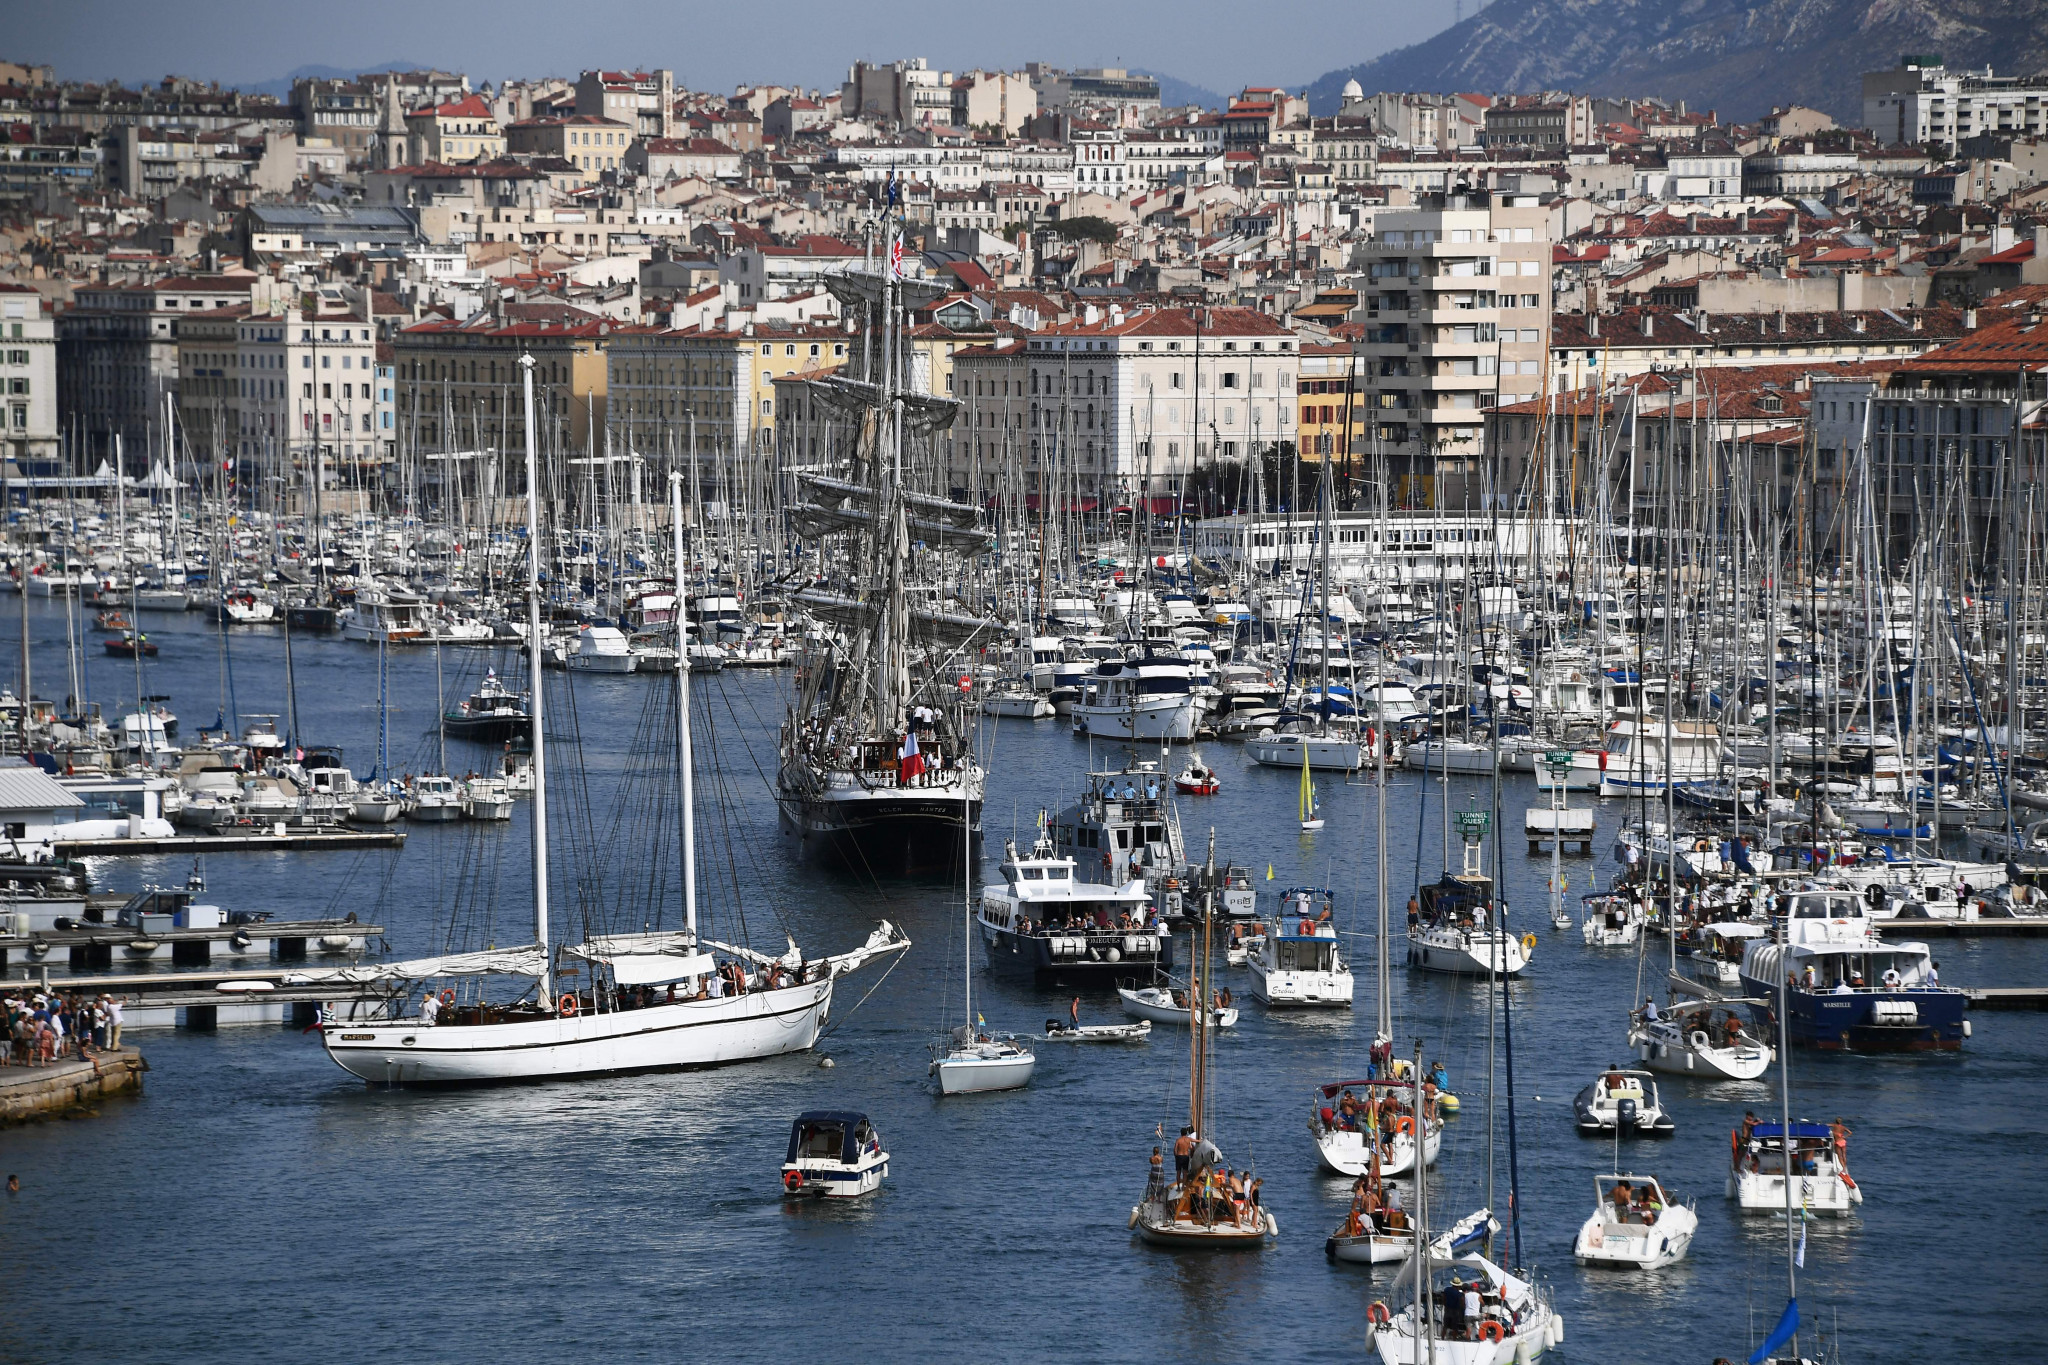 Sailing at Paris 2024 is due to be held in Marseille, with the southern French city set to host an Olympic Test Event in July of this year ©Getty Images